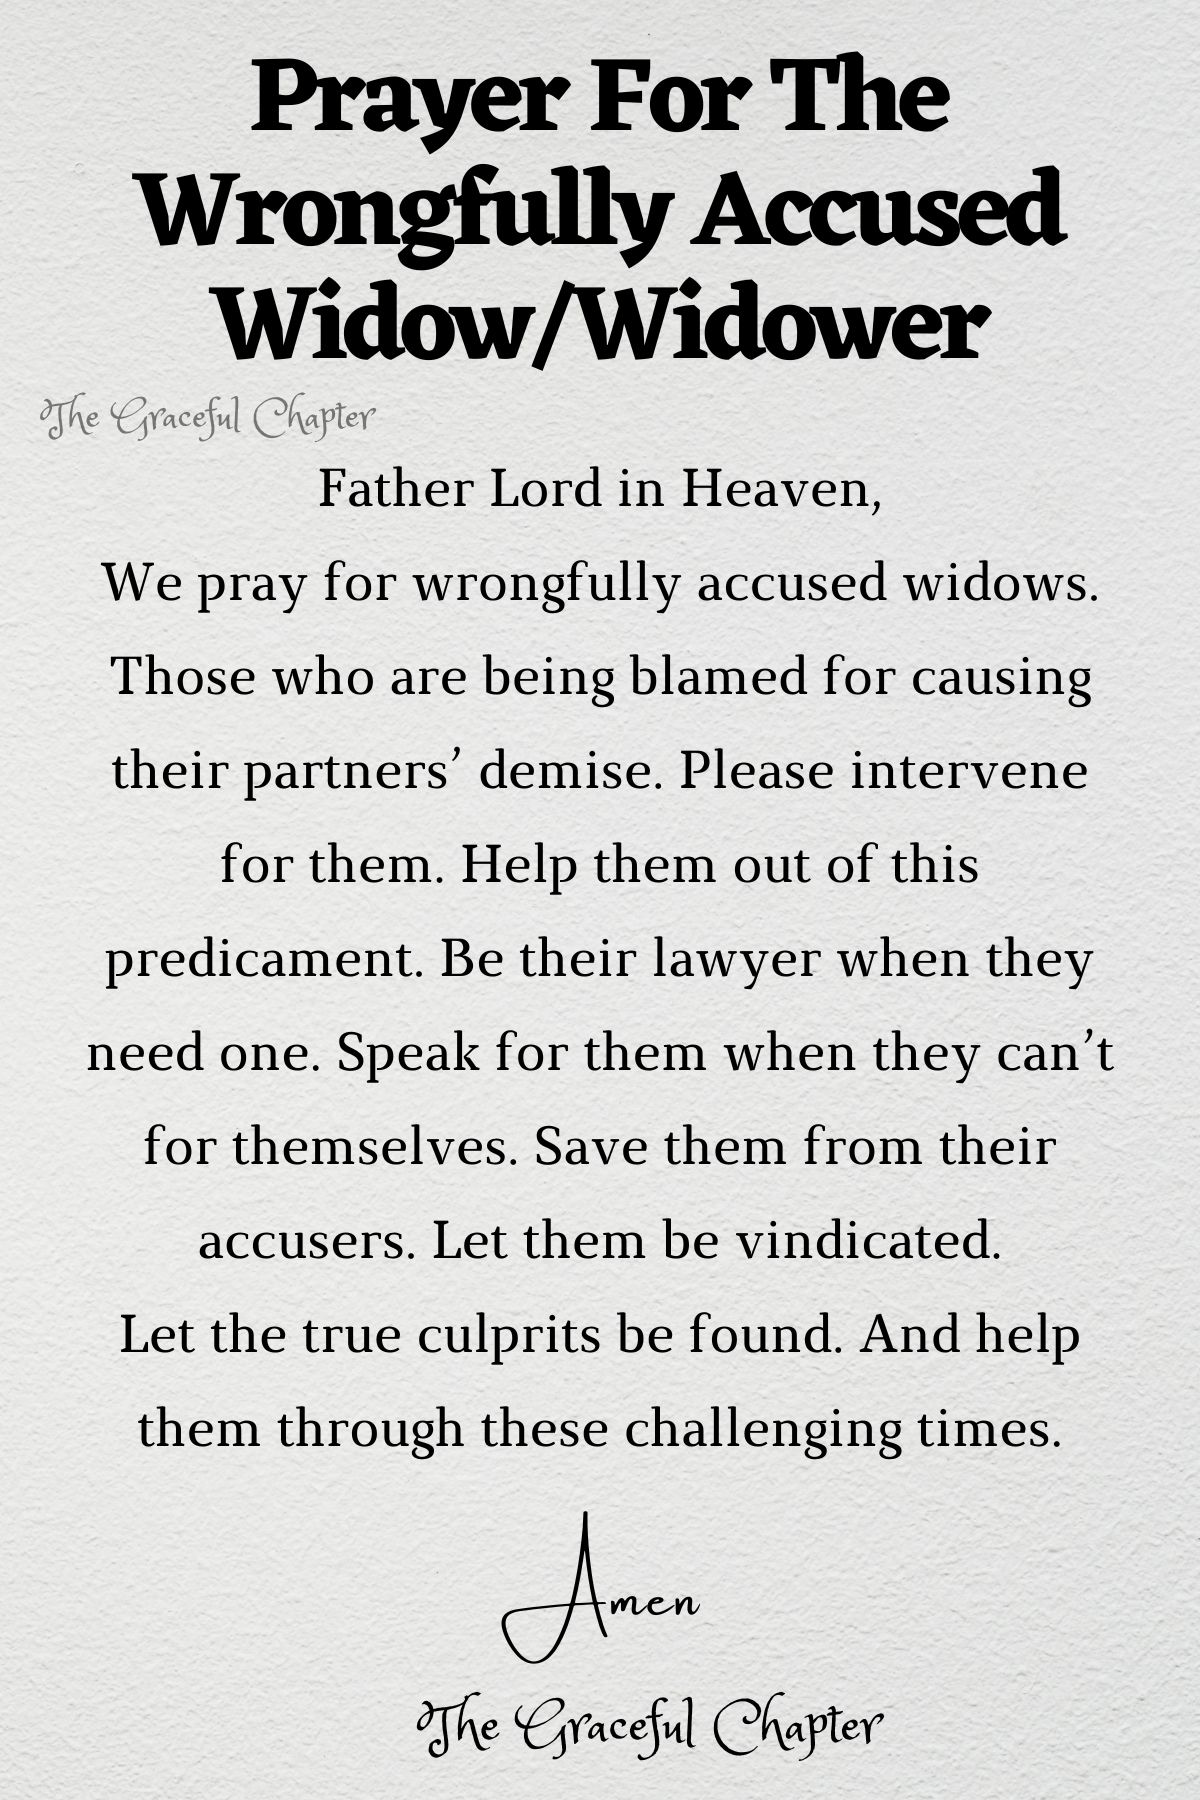 Prayer for the wrongfully accused widow/widower